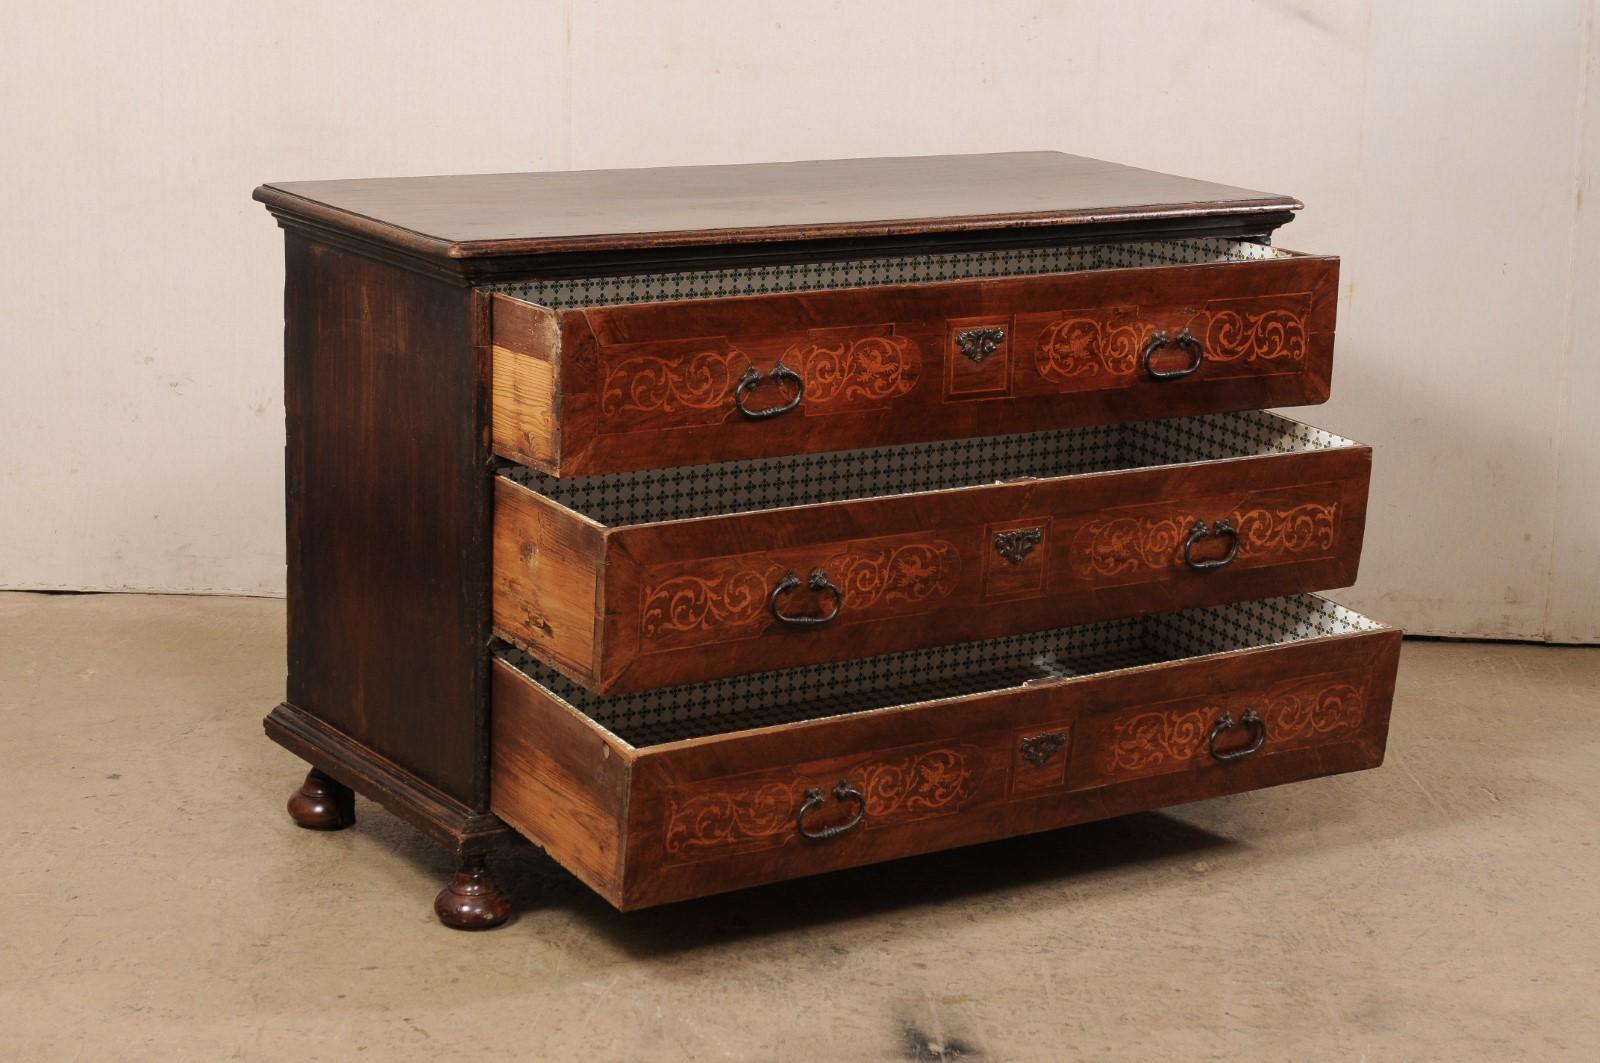 An Italian wooden chest of three drawers from the mid-18th century. This antique chest from Italy has a rectangular-shaped top with molded edging that slightly overhangs the case below, which houses three full-sized drawers. Each drawer front is